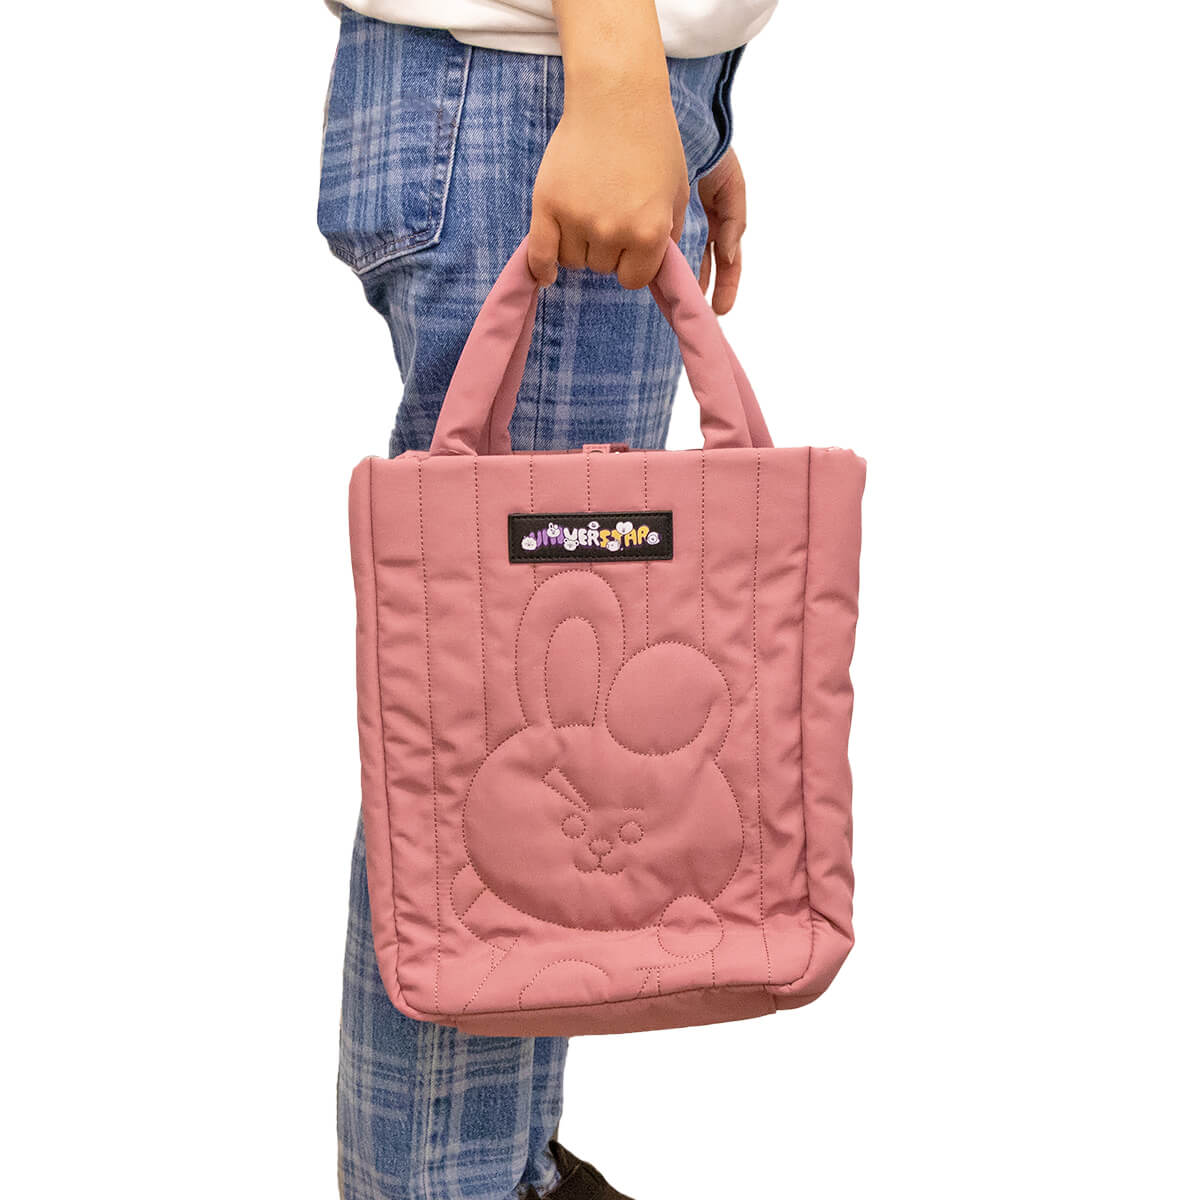 Cooky Tote Bags for Sale